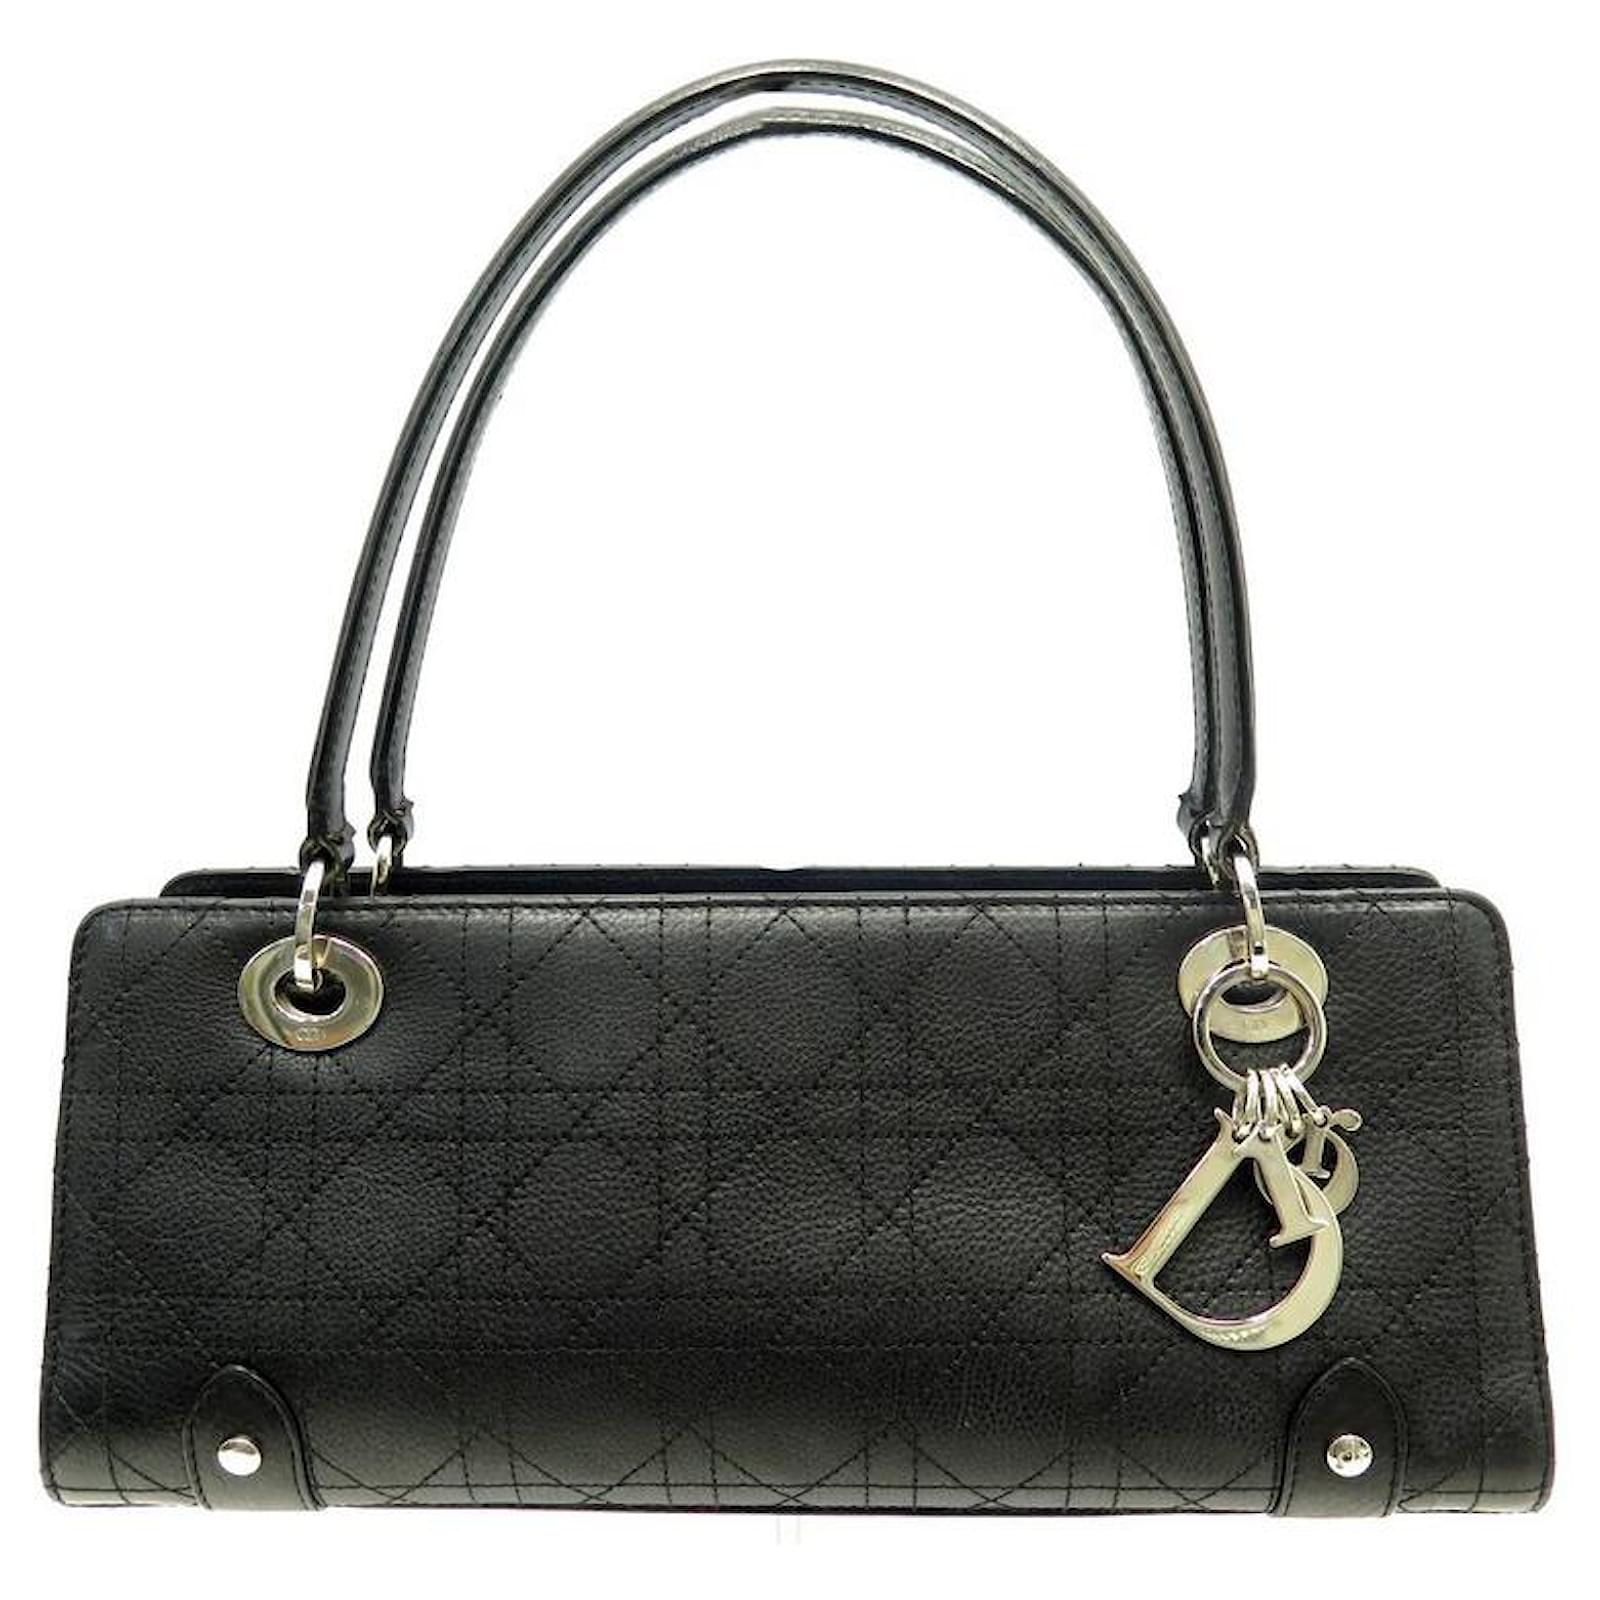 CHRISTIAN DIOR EAST WEST HANDBAG IN BLACK GRAINED CANNAGE LEATHER HAND ...